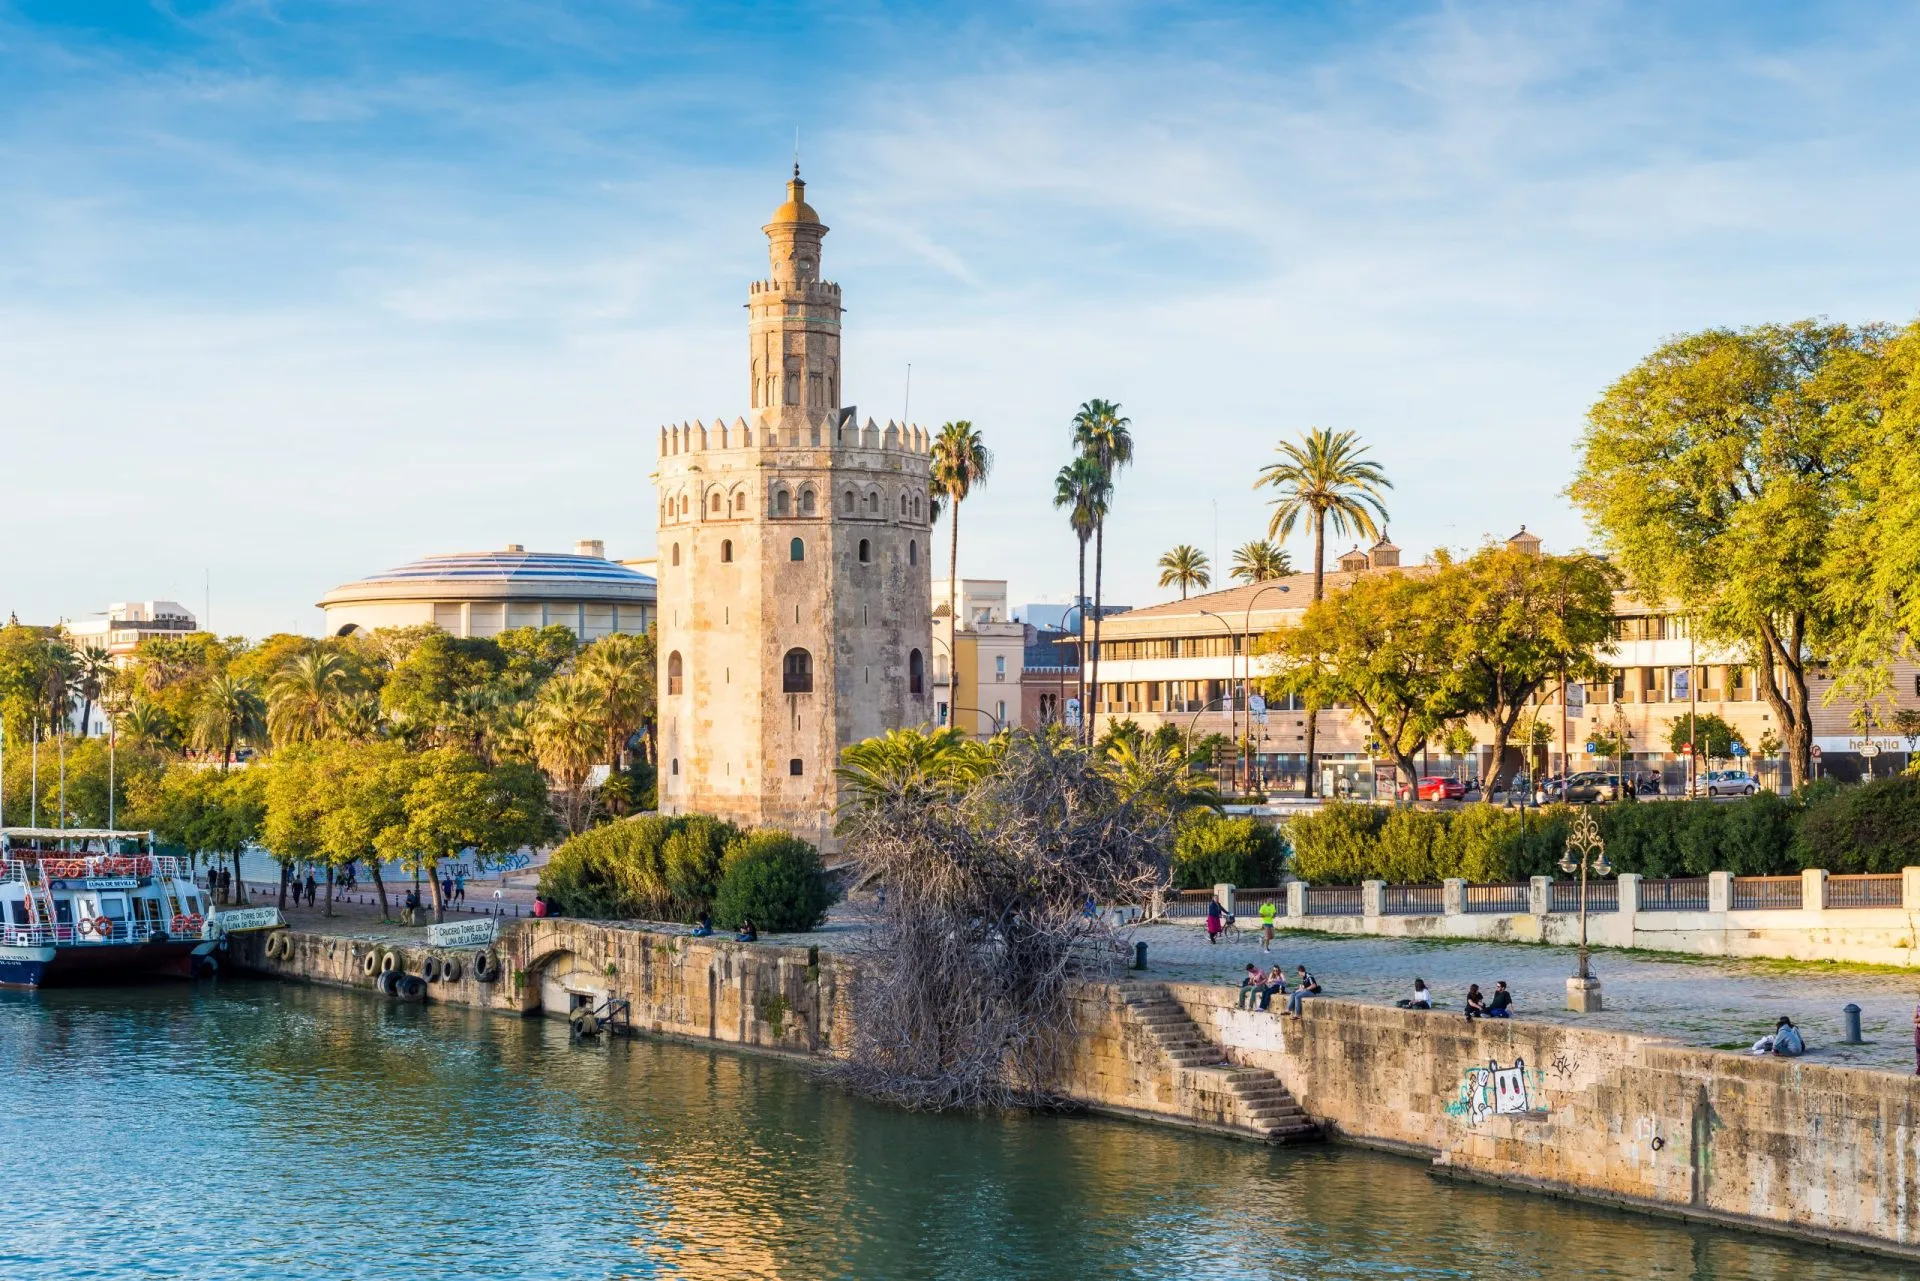 The Torre del Oro tower in Seville